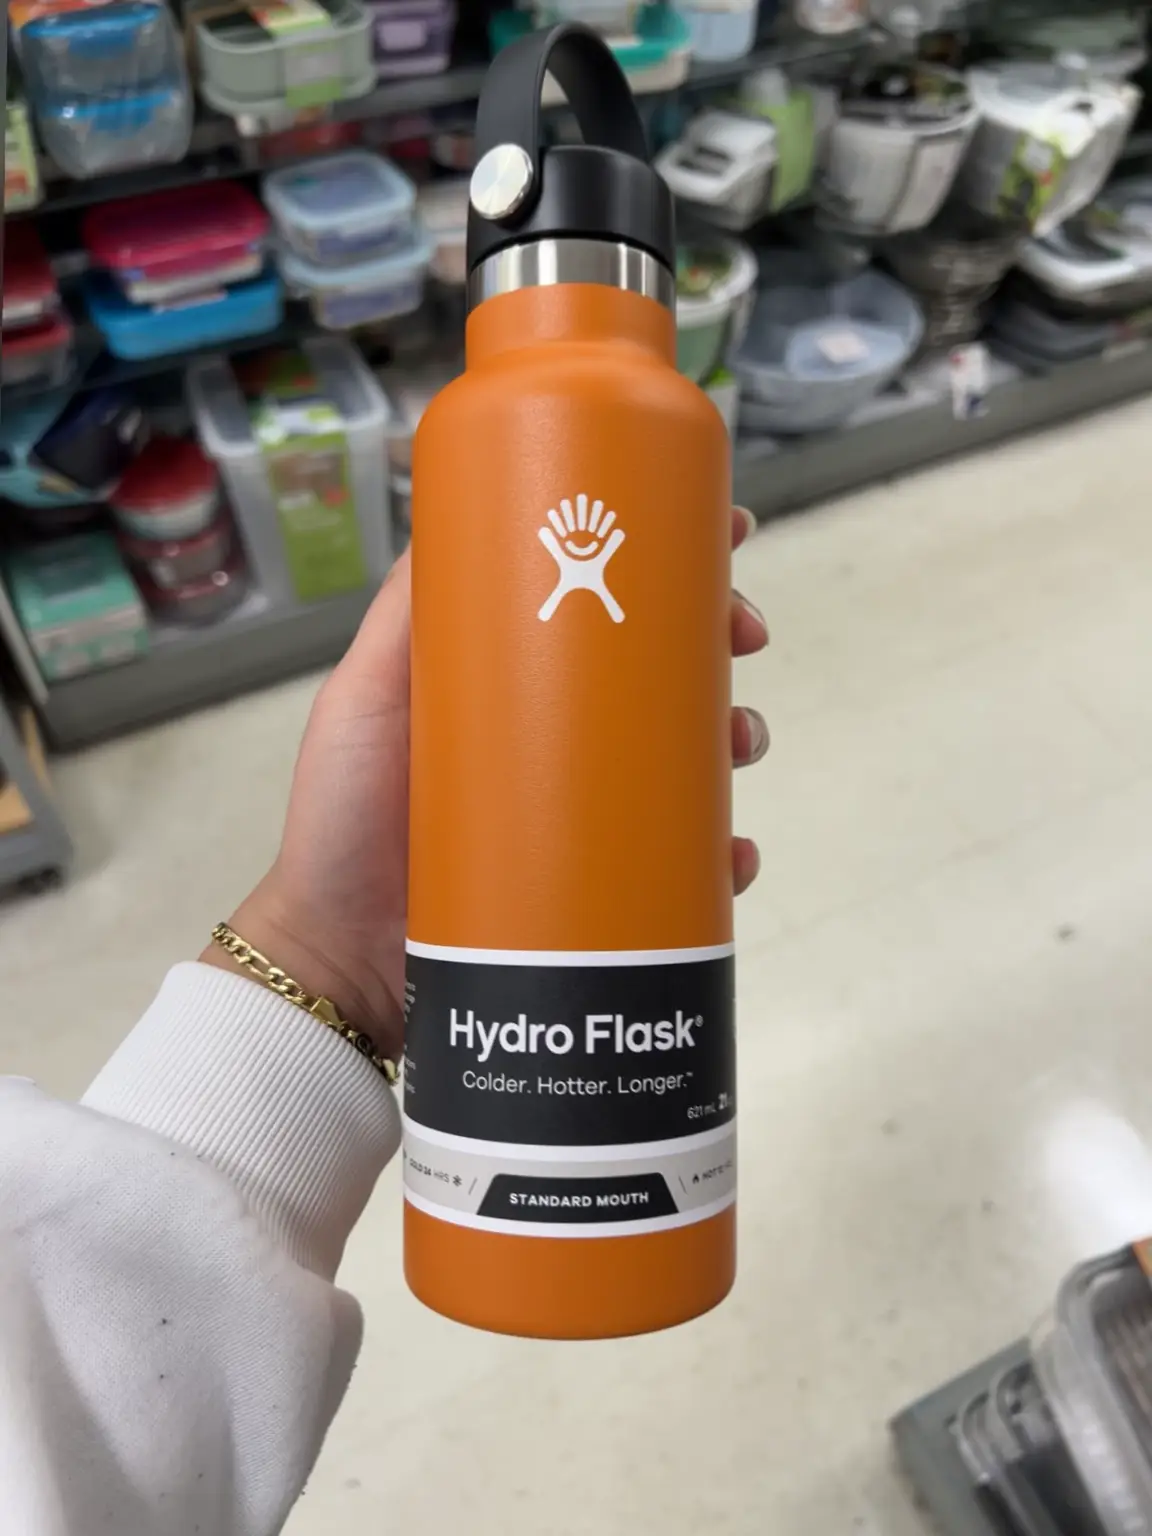 Ways to Customize Your Hydro Flask Online - Lemon8 Search